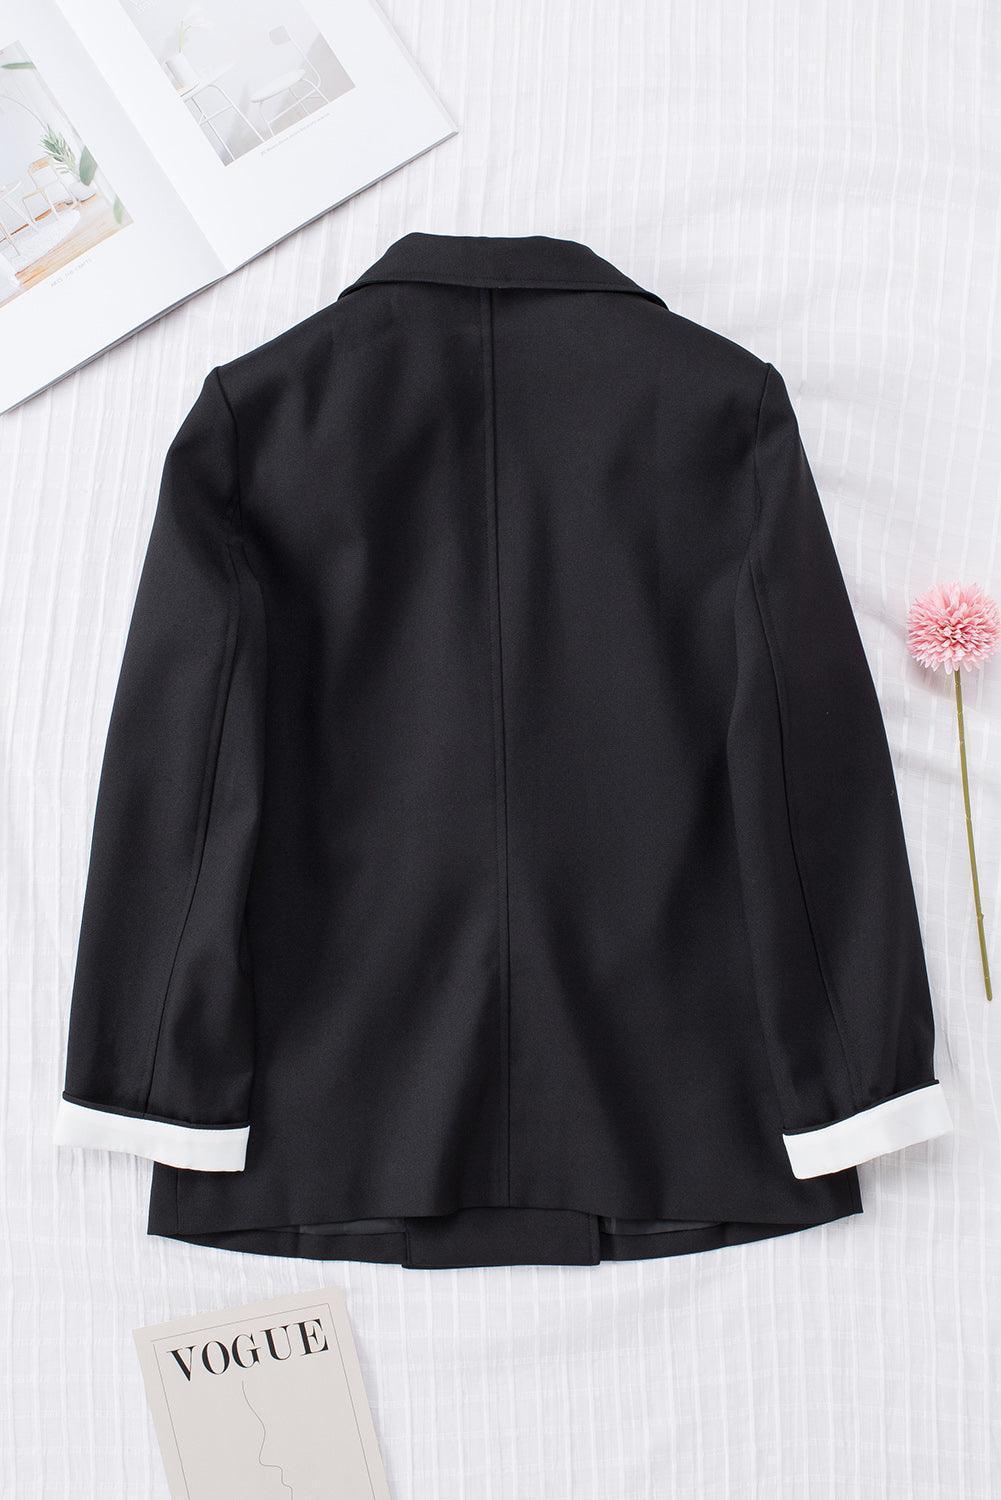 Women's Casual Double Breasted Blazer with Pockets - MXSTUDIO.COM